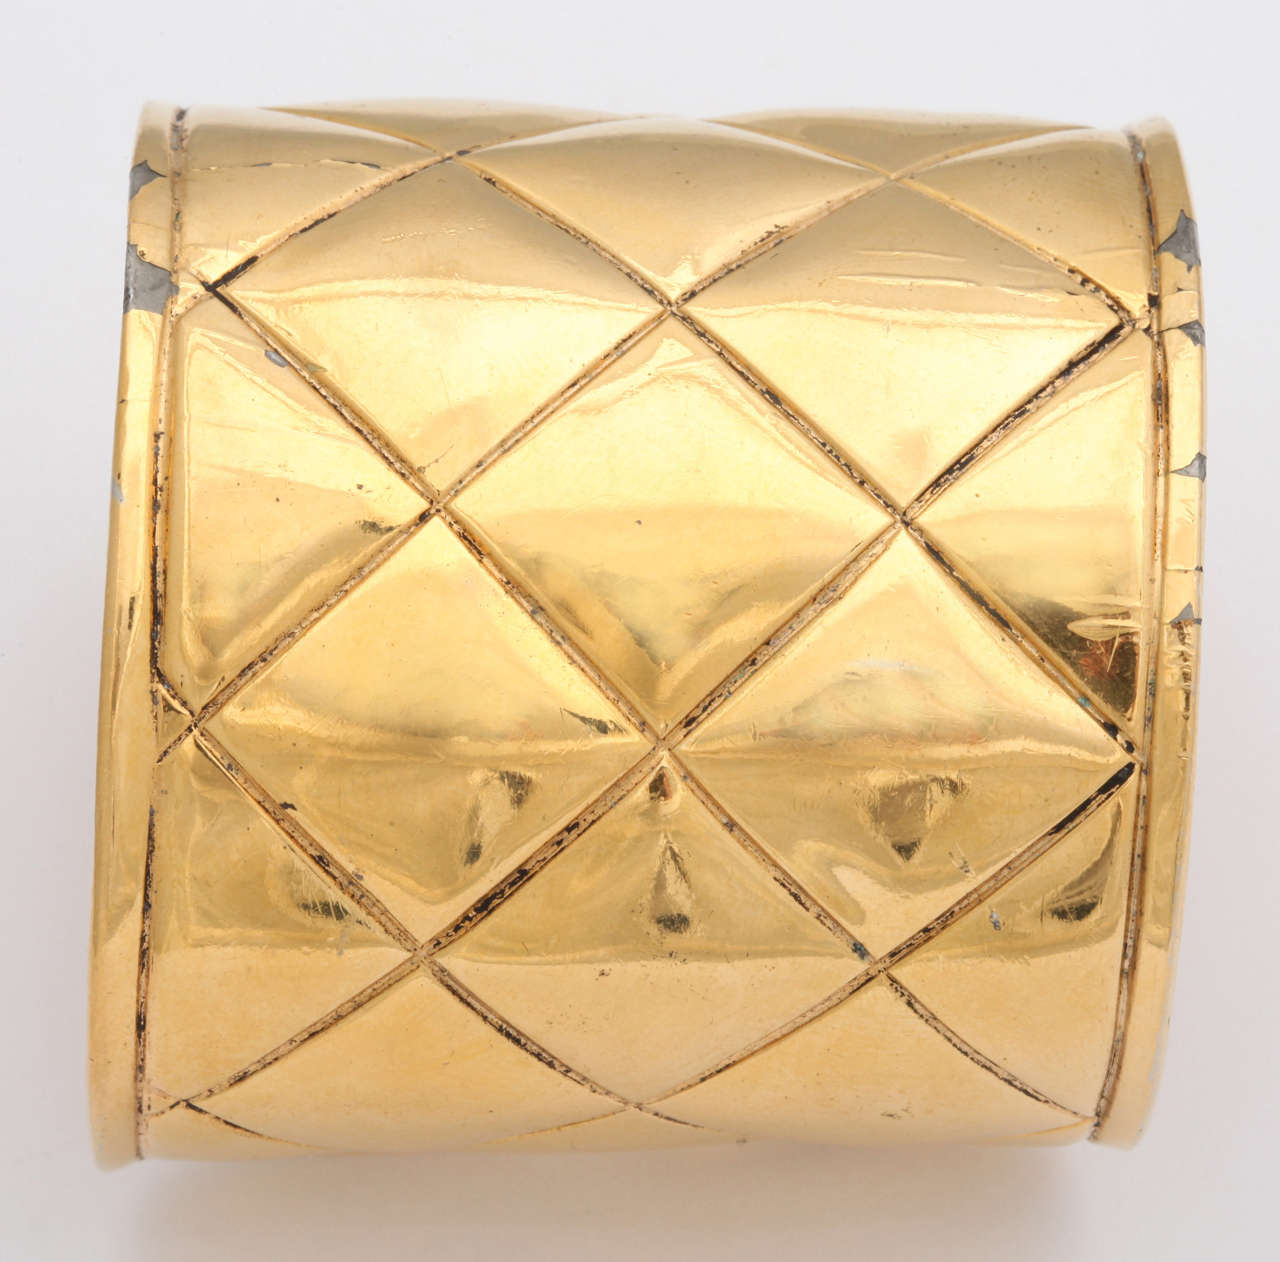 Chanel Quilted Bangle Bracelet In Good Condition For Sale In Chicago, IL